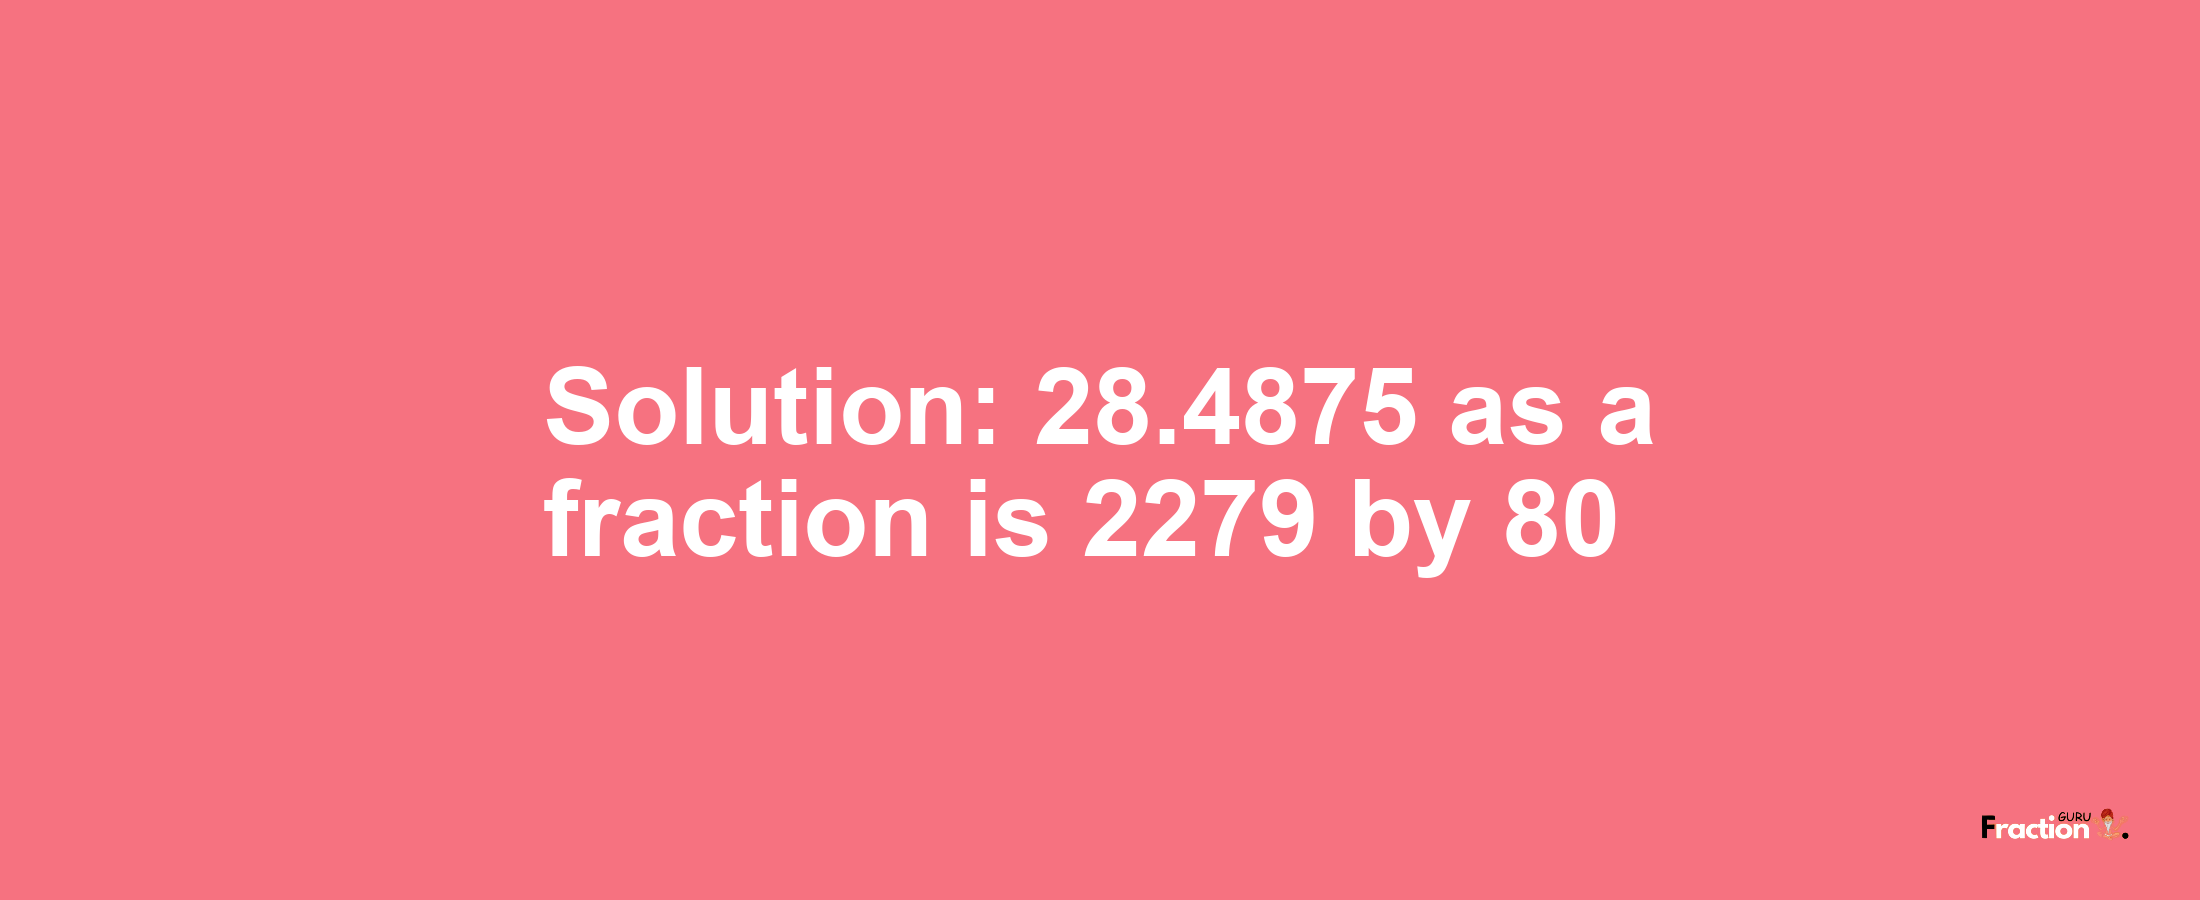 Solution:28.4875 as a fraction is 2279/80